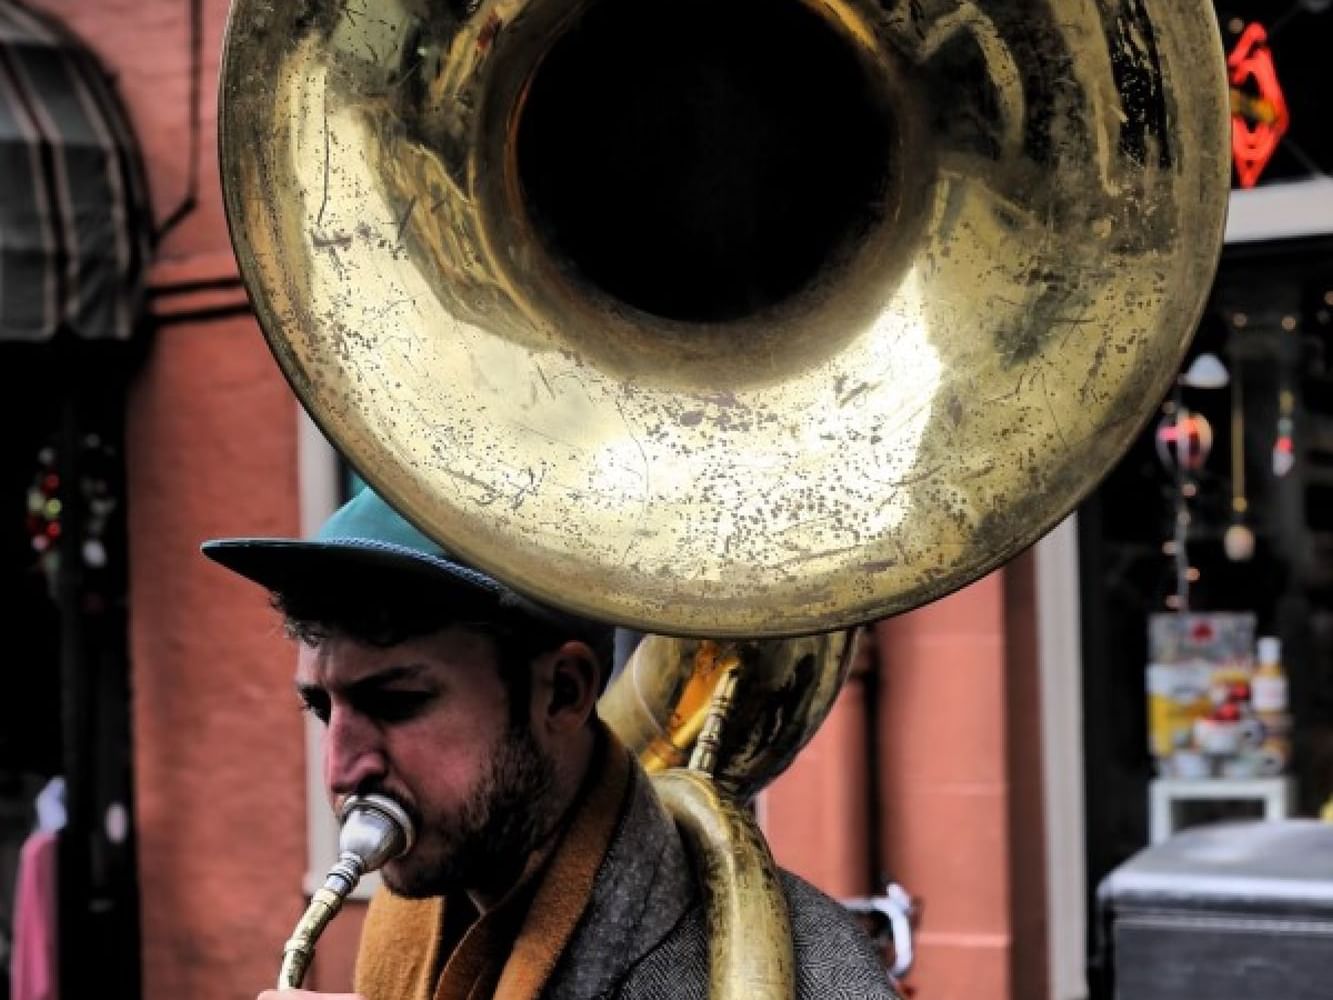 A man playing a tuba in the streets near the hotel